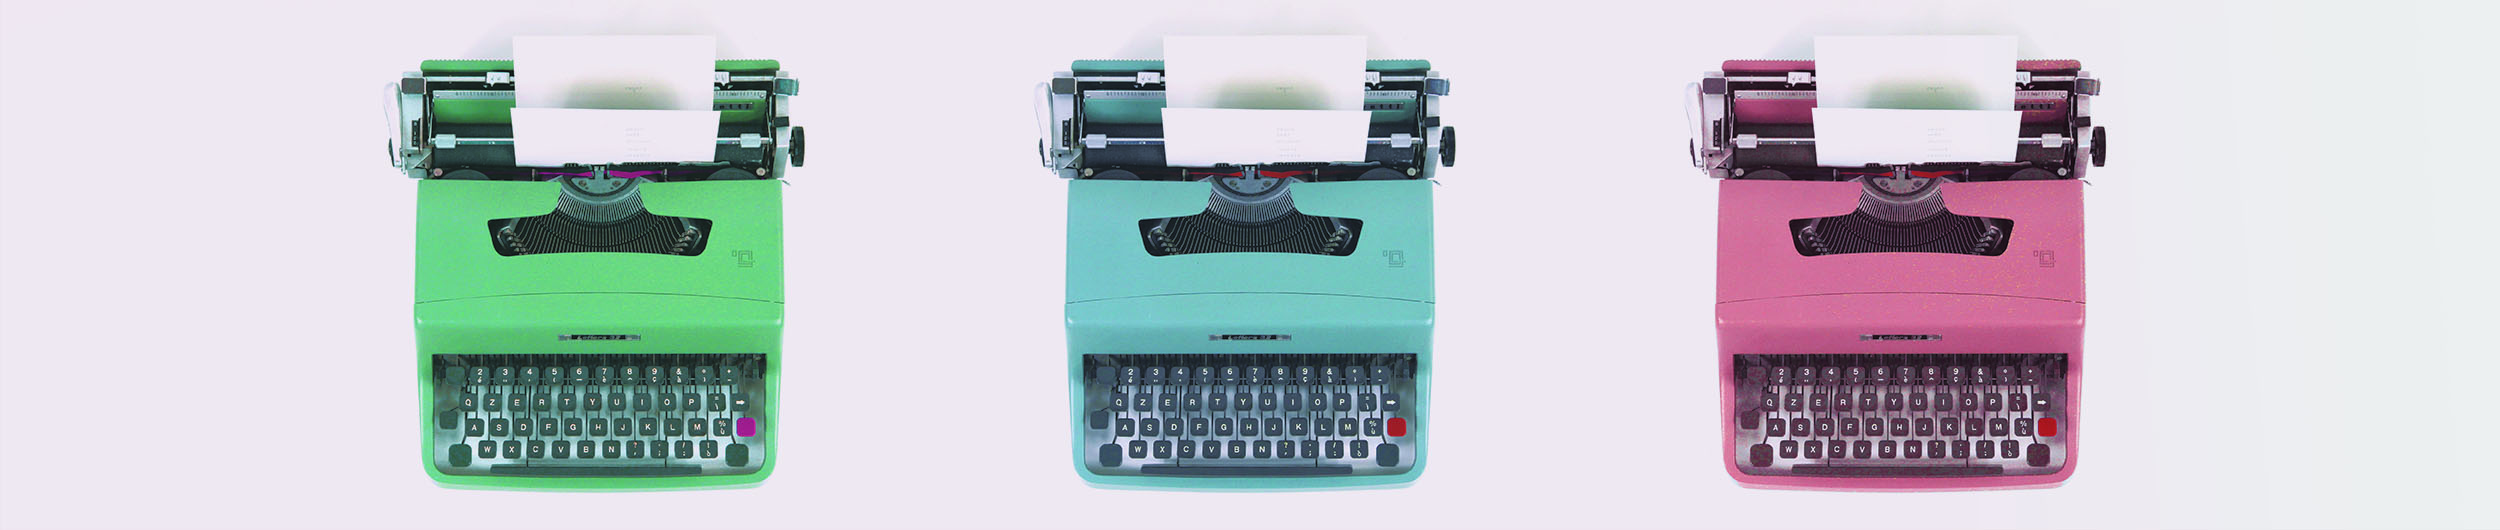 What is copywriting?